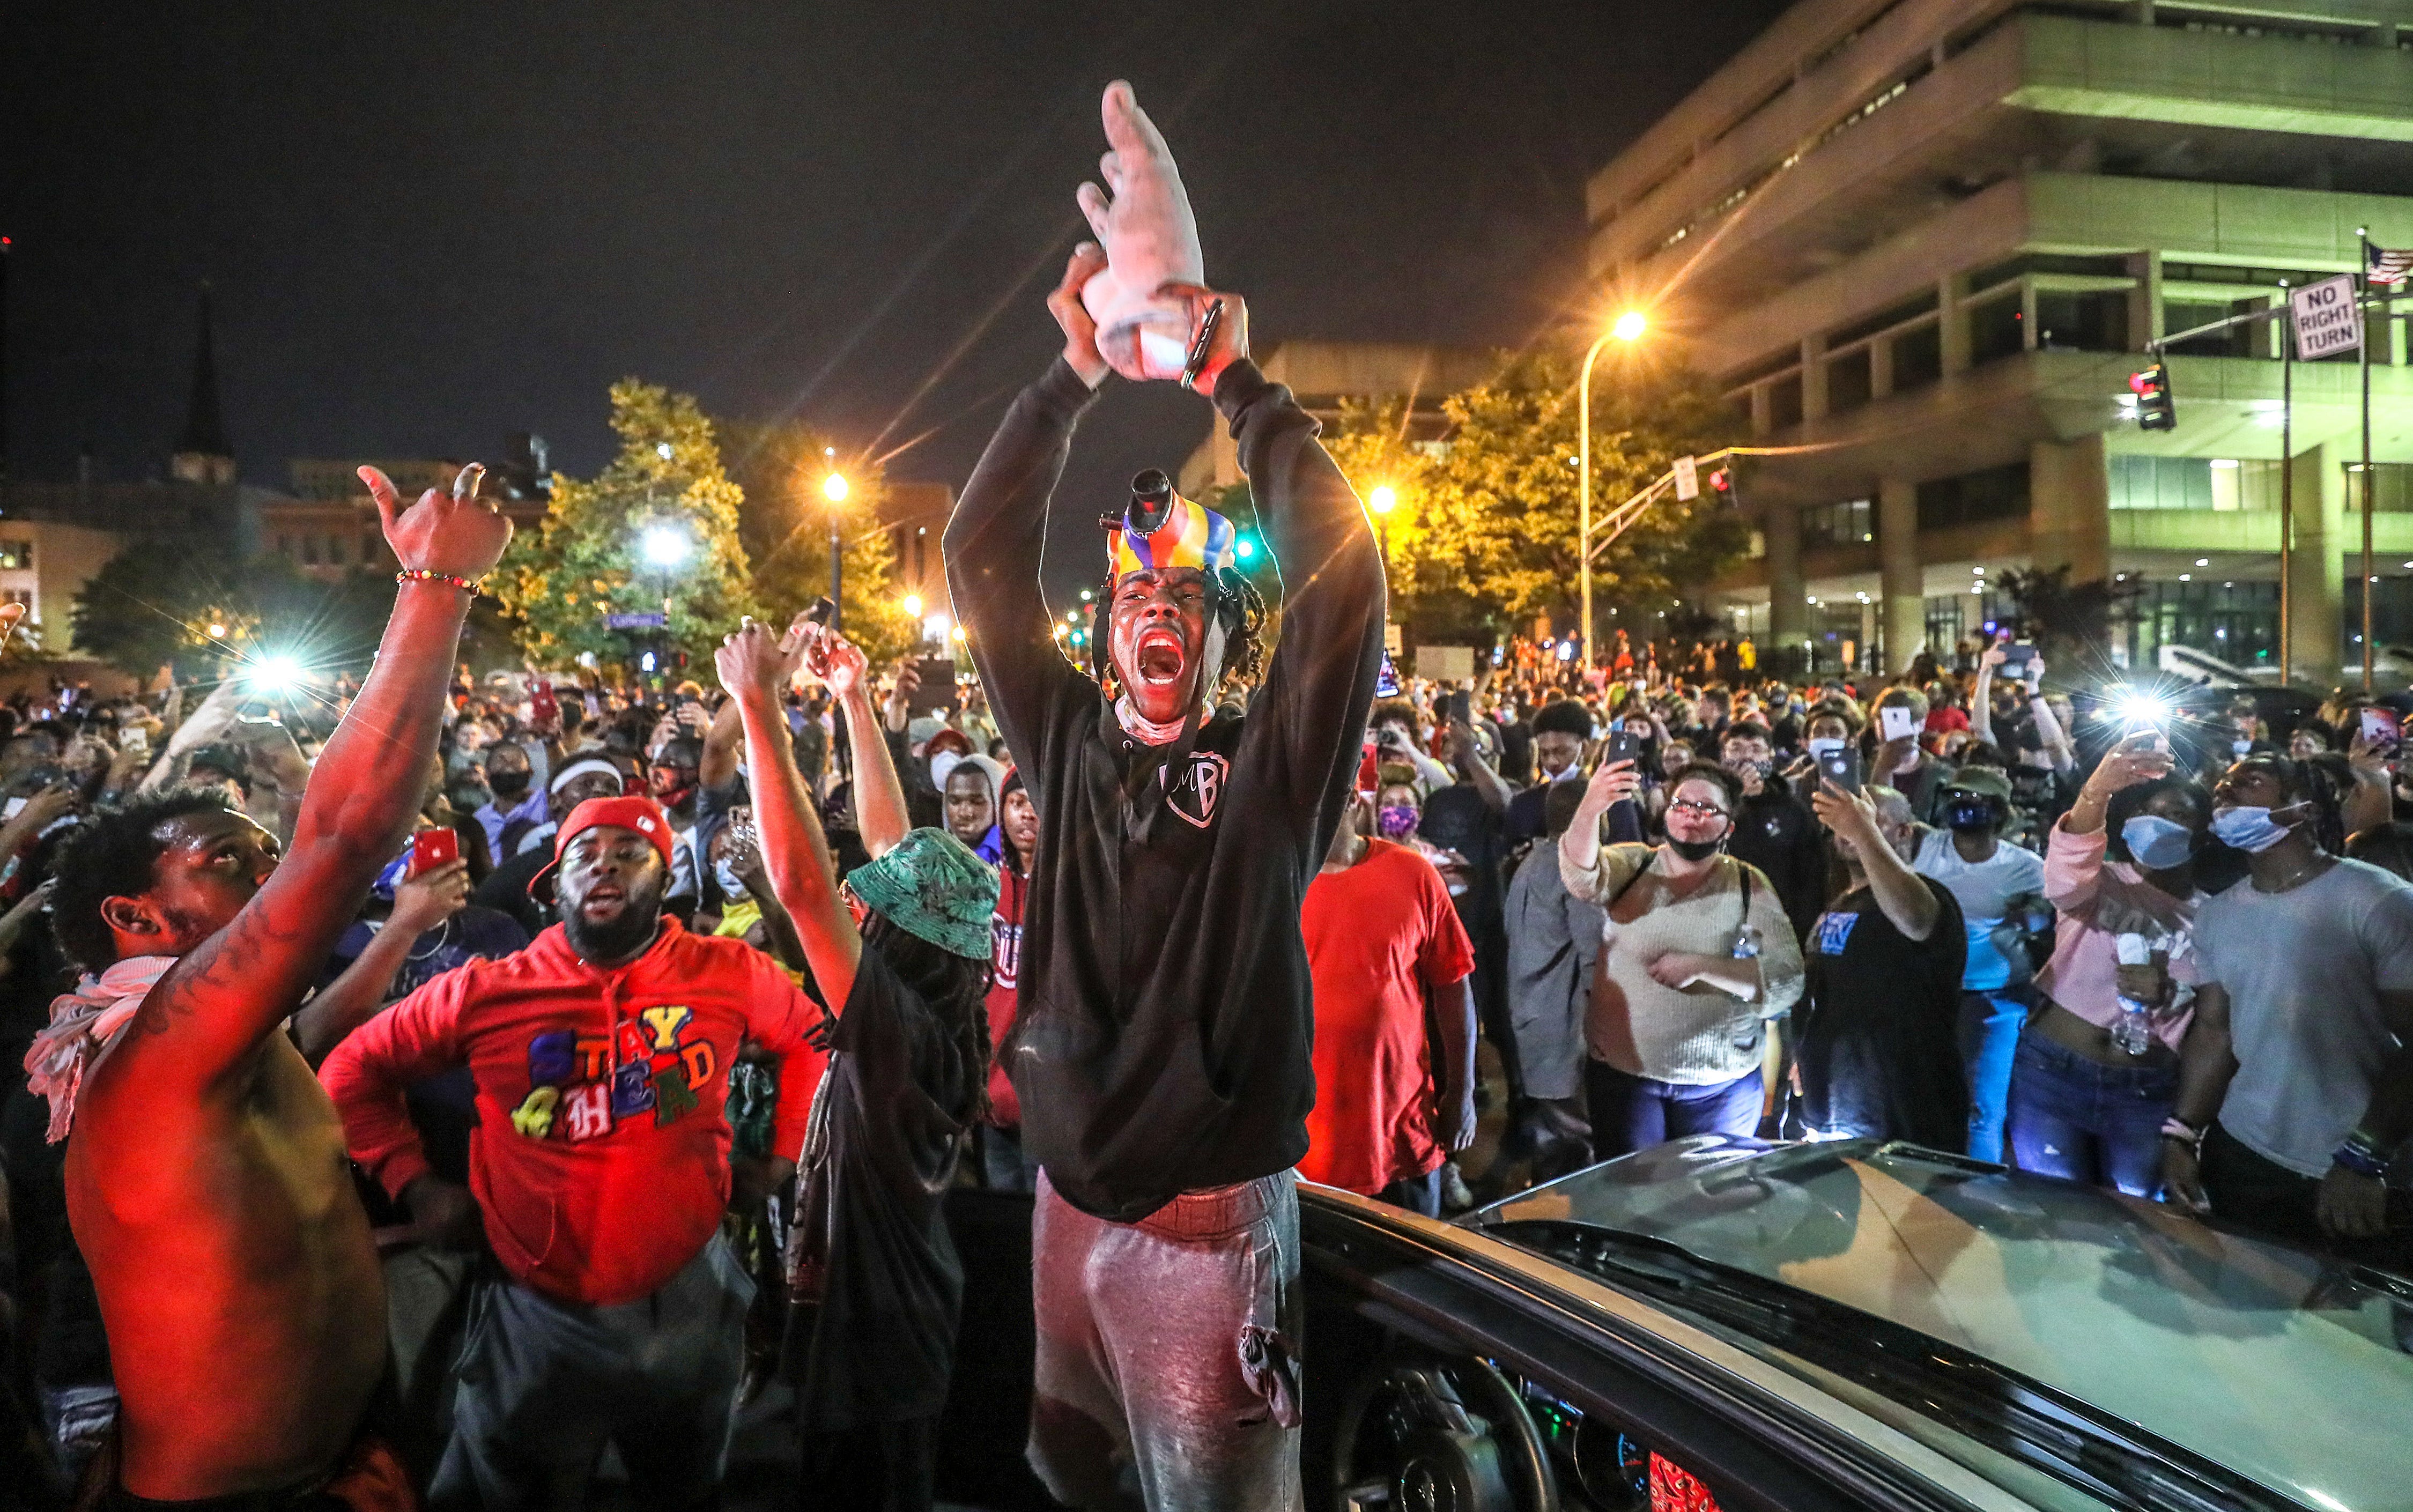 A protester holds up the hand of King Louis XVI after it was torn from the statue during a demonstration on Thursday, May 28, 2020. Louisville broke into protests following the murder of Breonna Taylor.